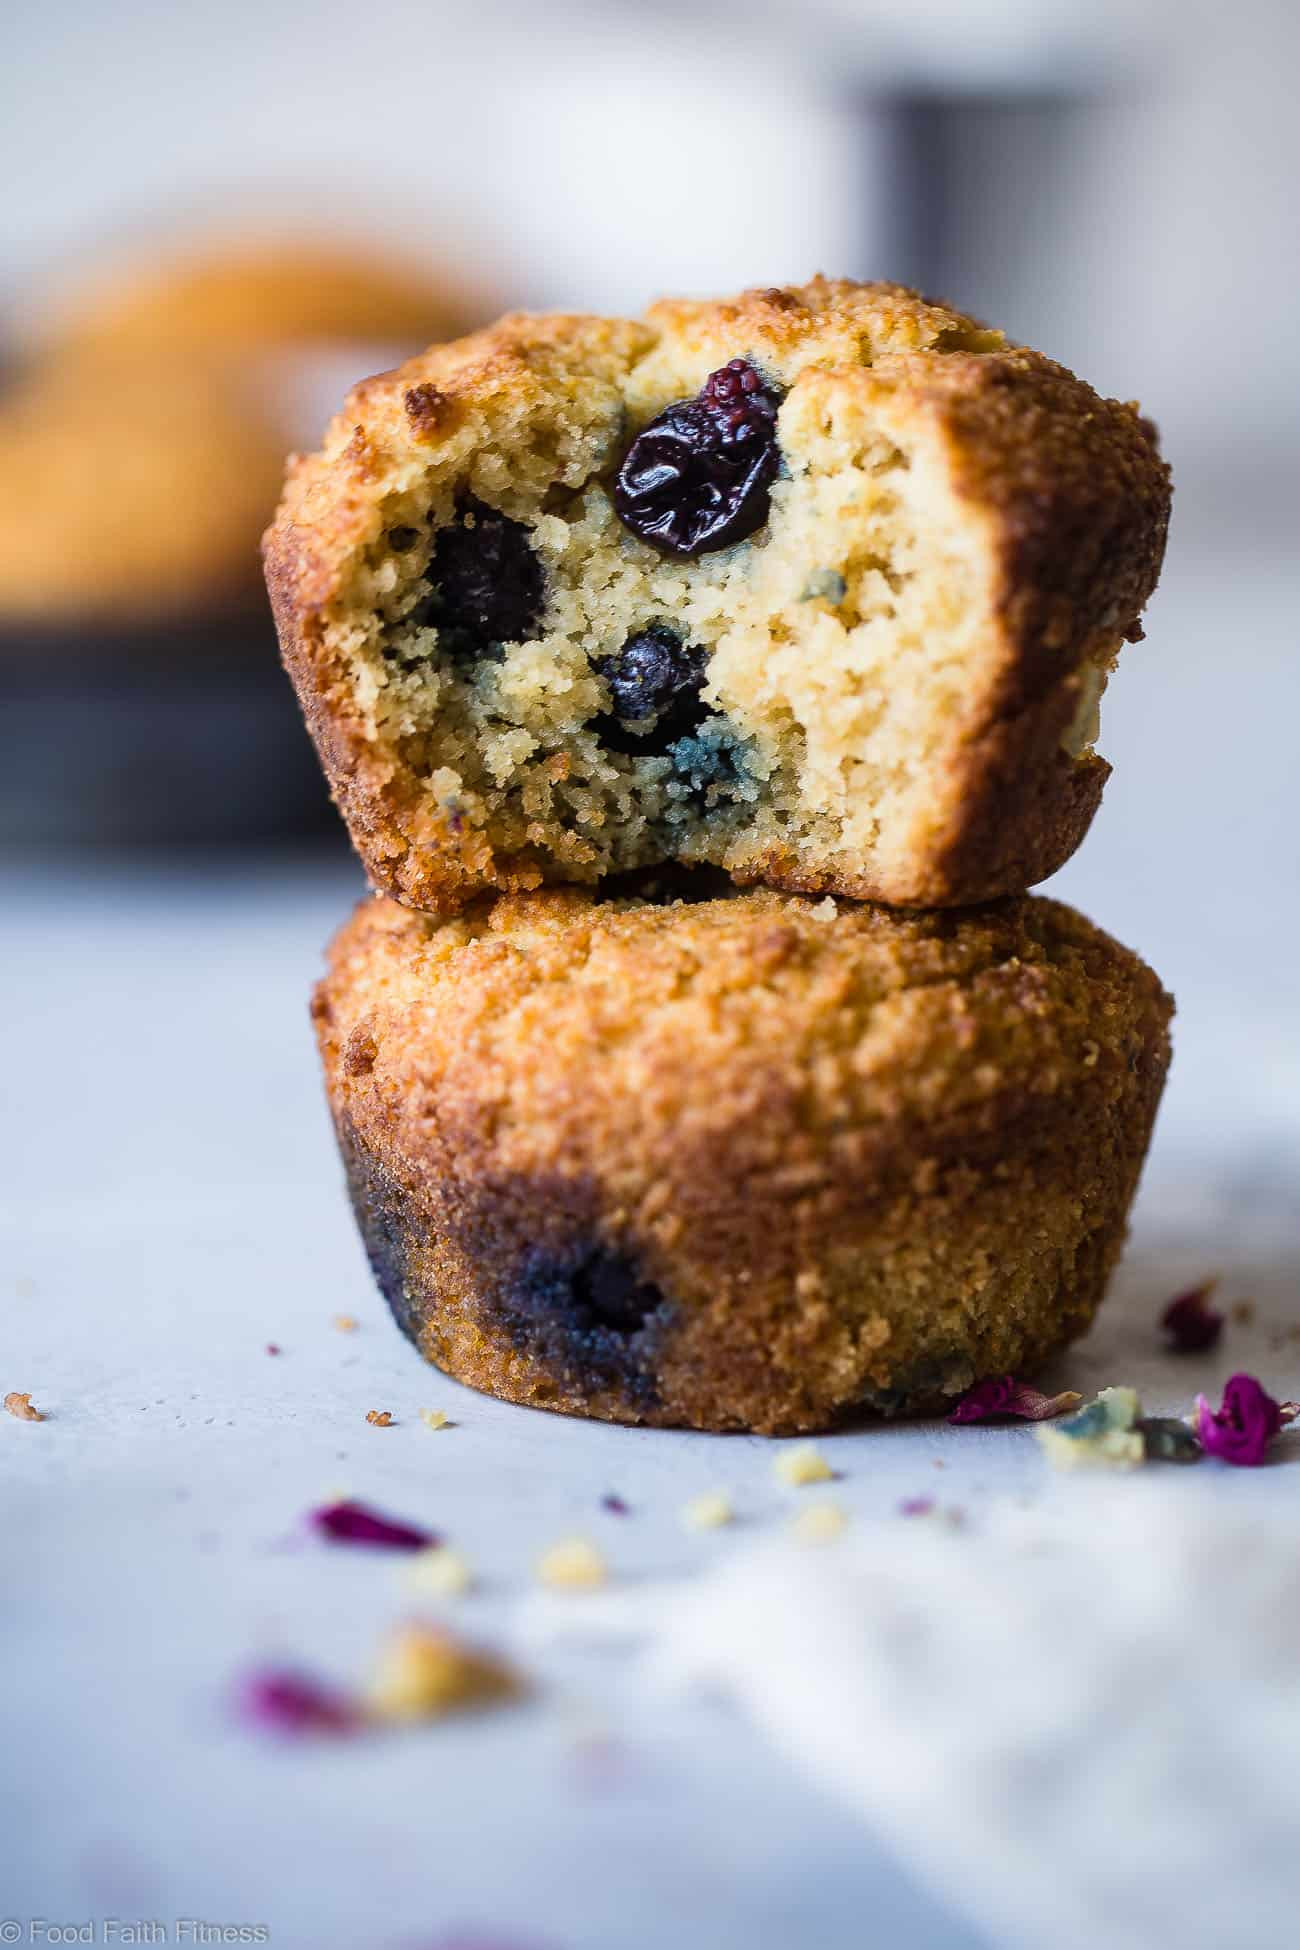 Low Carb Keto Muffins
 Low Carb Sugar Free Keto Blueberry Muffins with Almond Flour